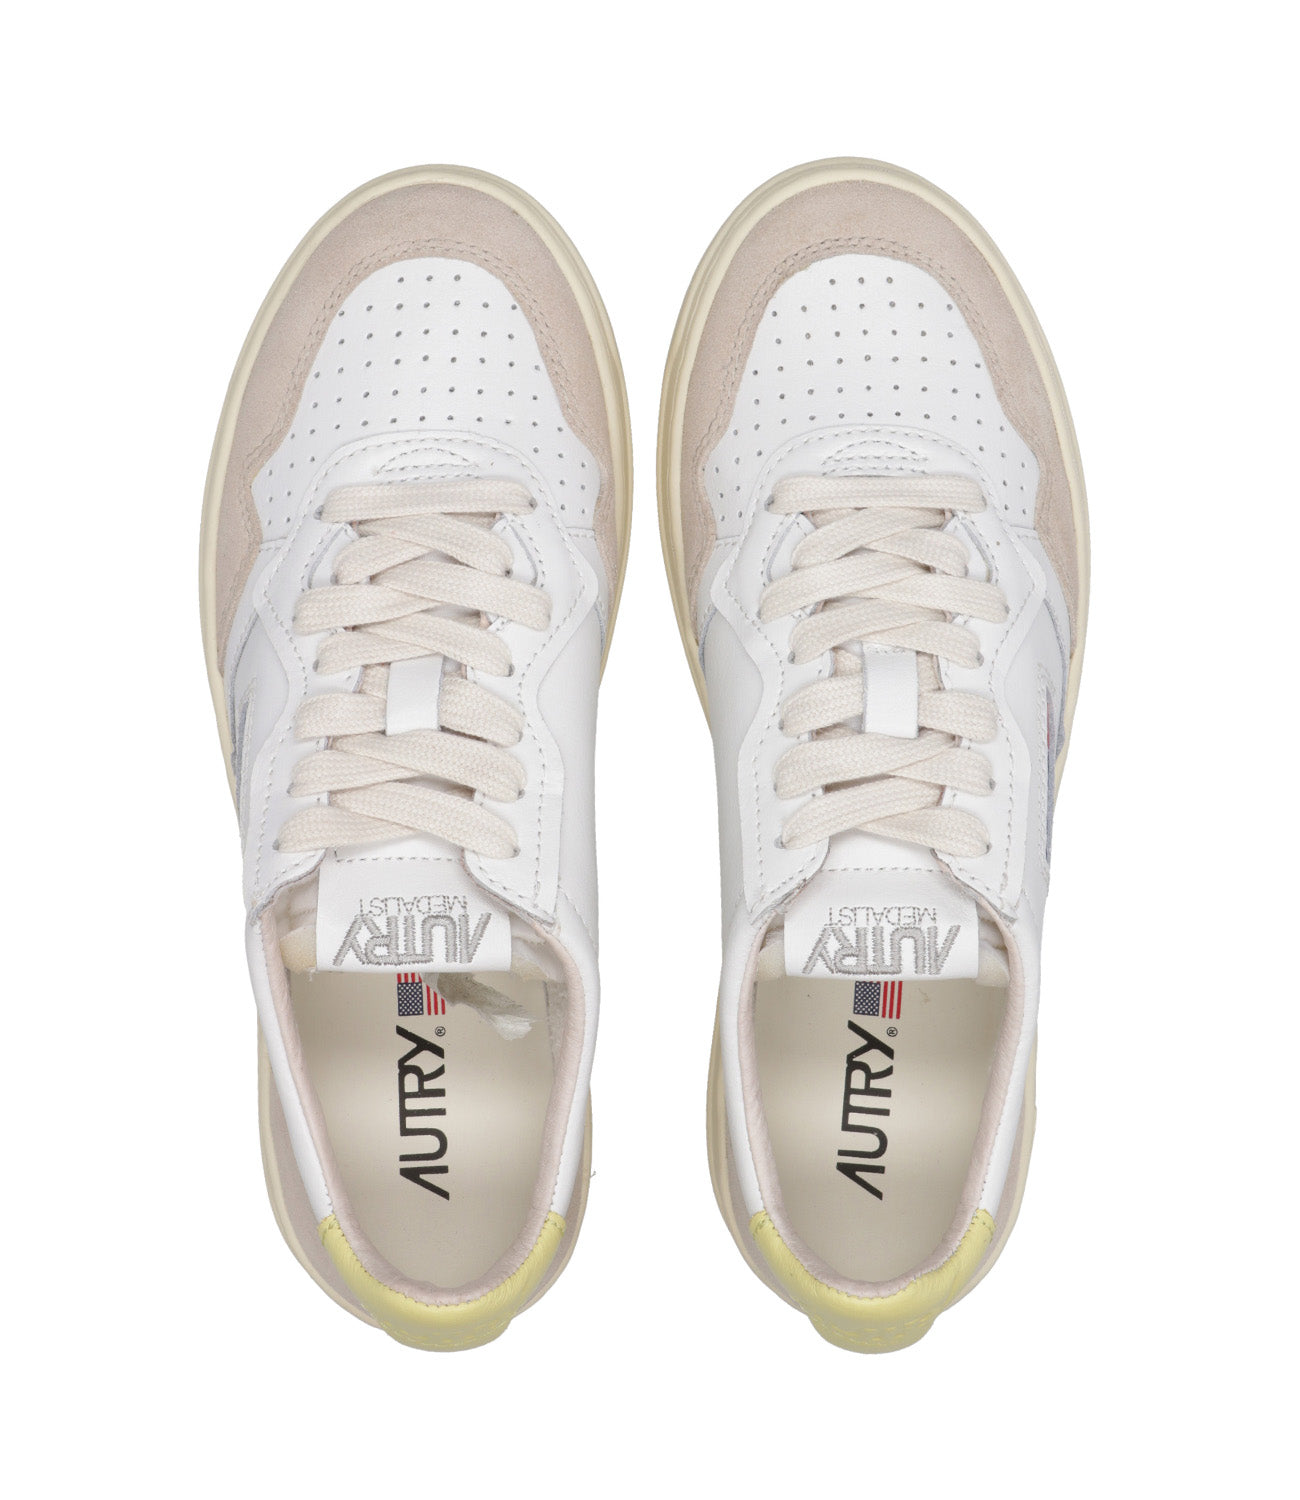 Autry | Sneakers Medalist Low Bianca e Gialla